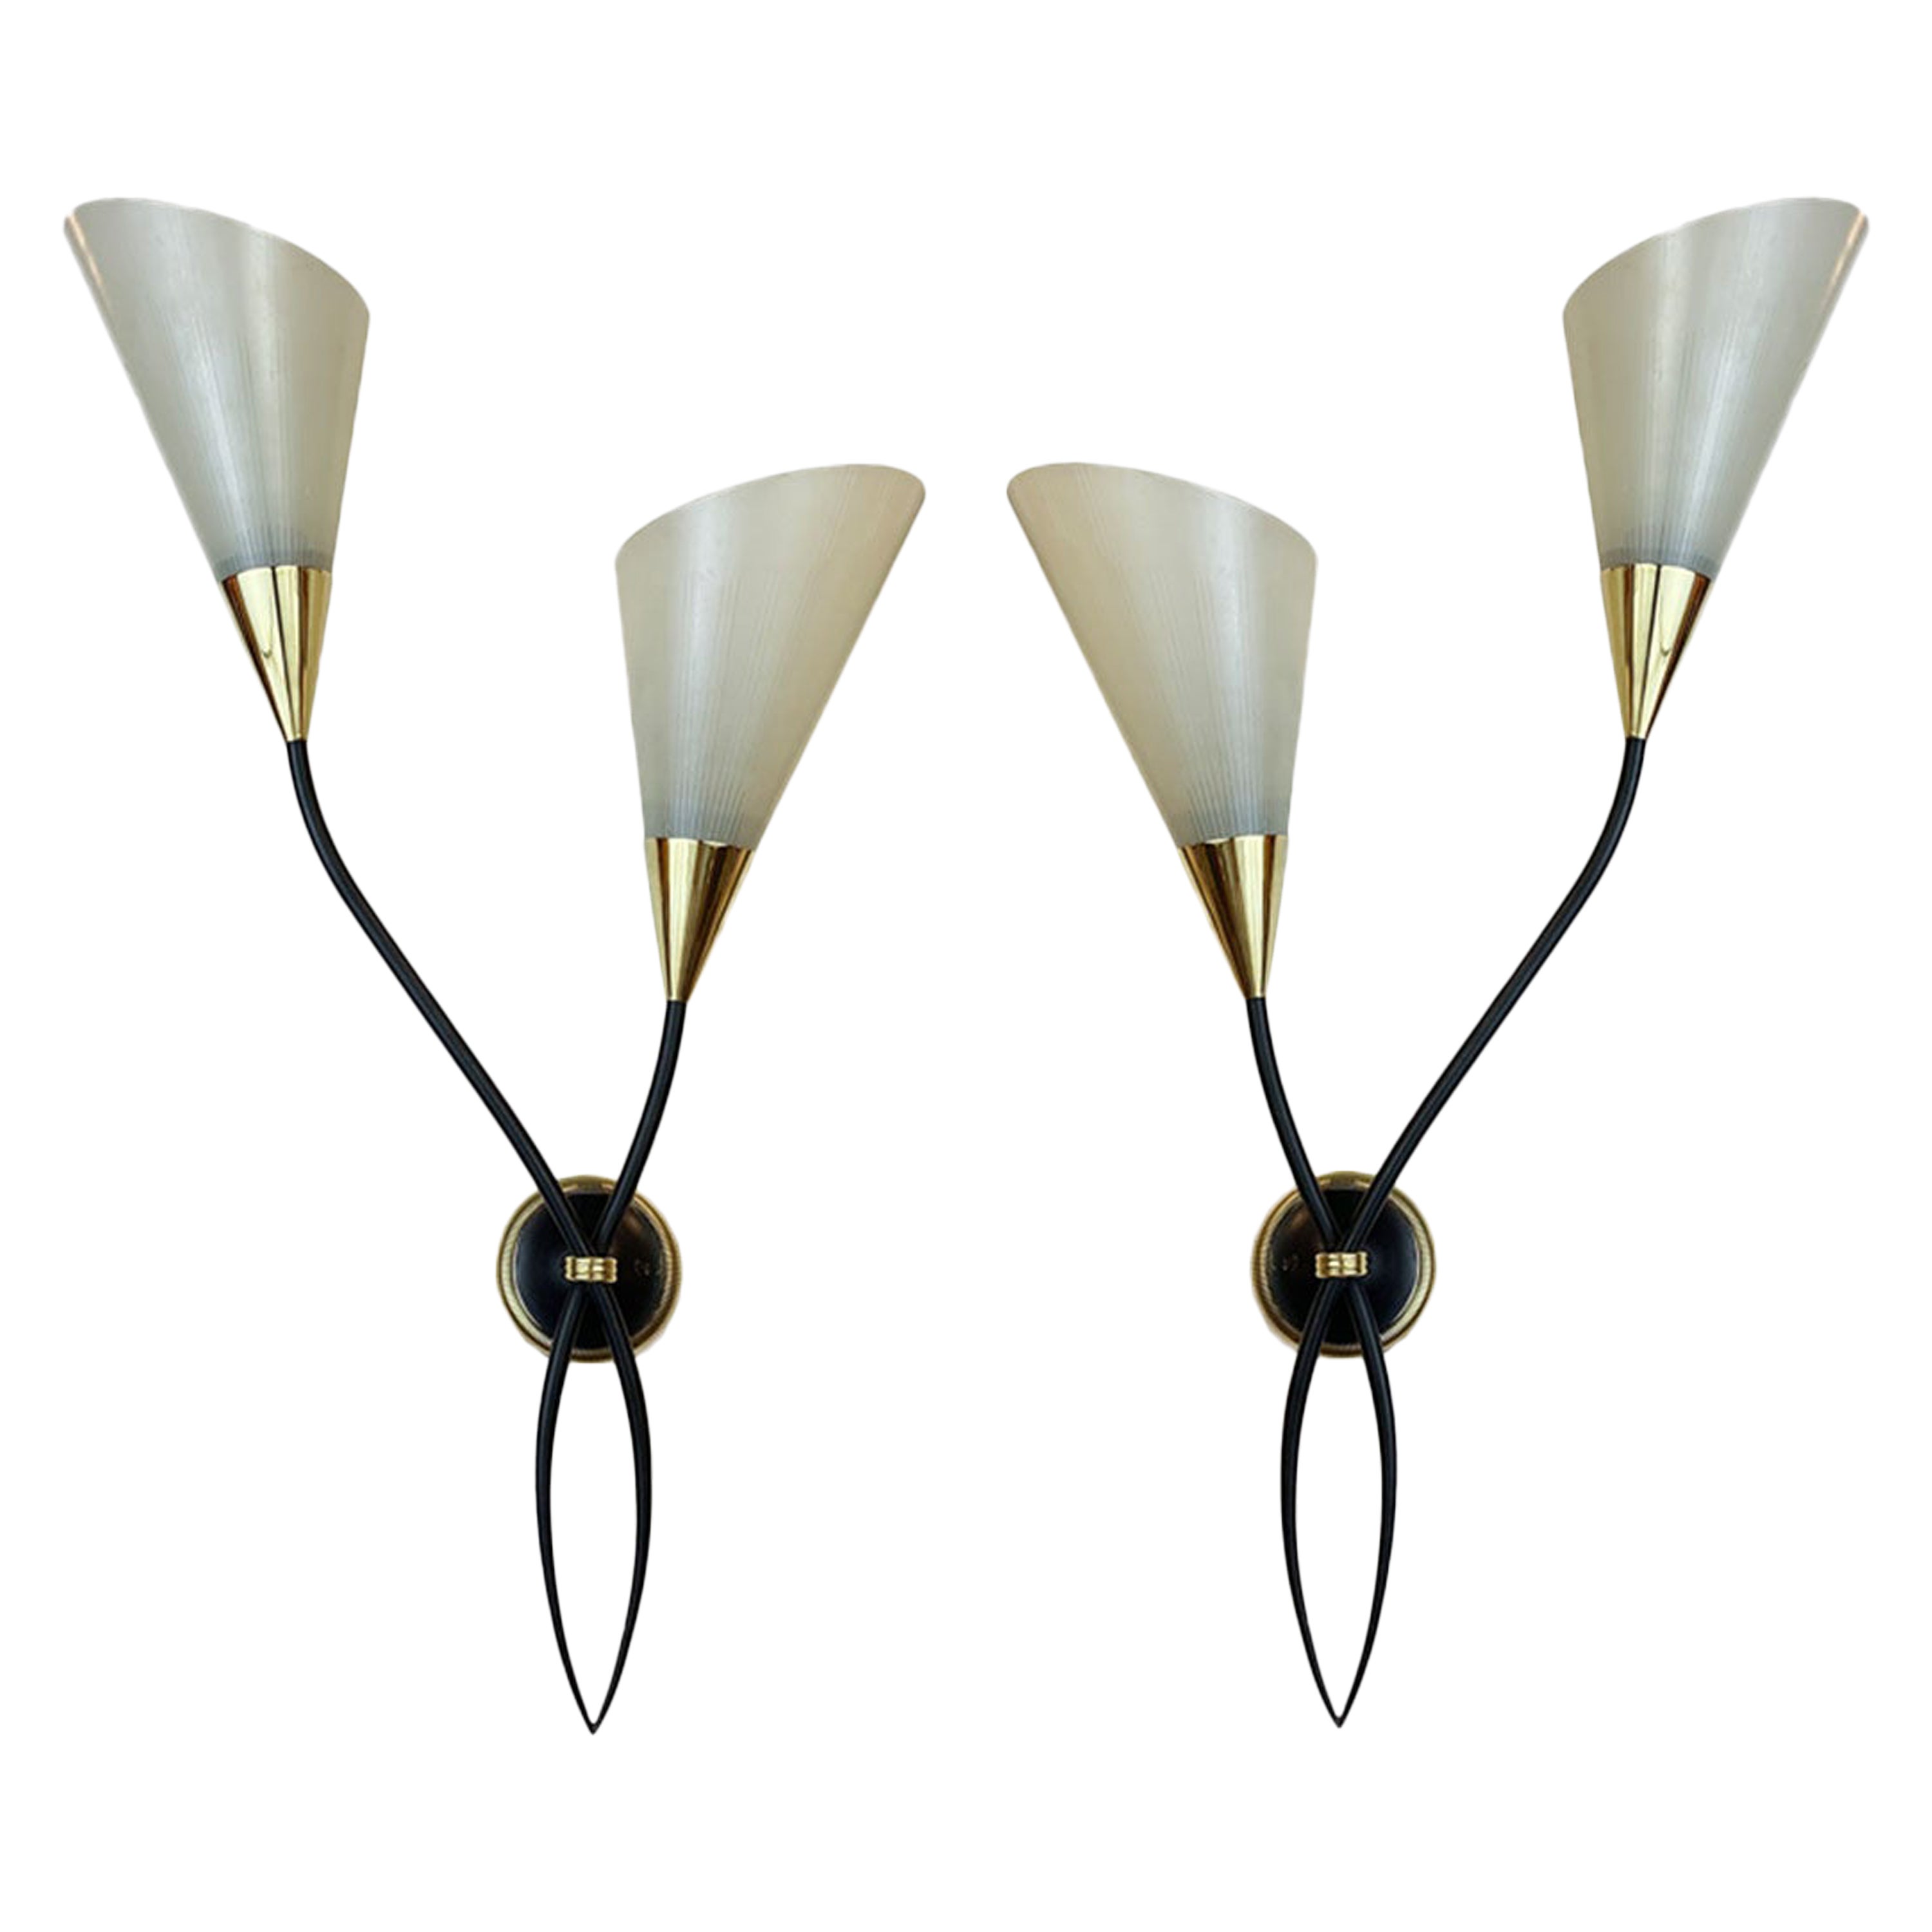 Gorgeous Mid-Century Modern Style Pair of Wall Lamps, circa 1950s For Sale